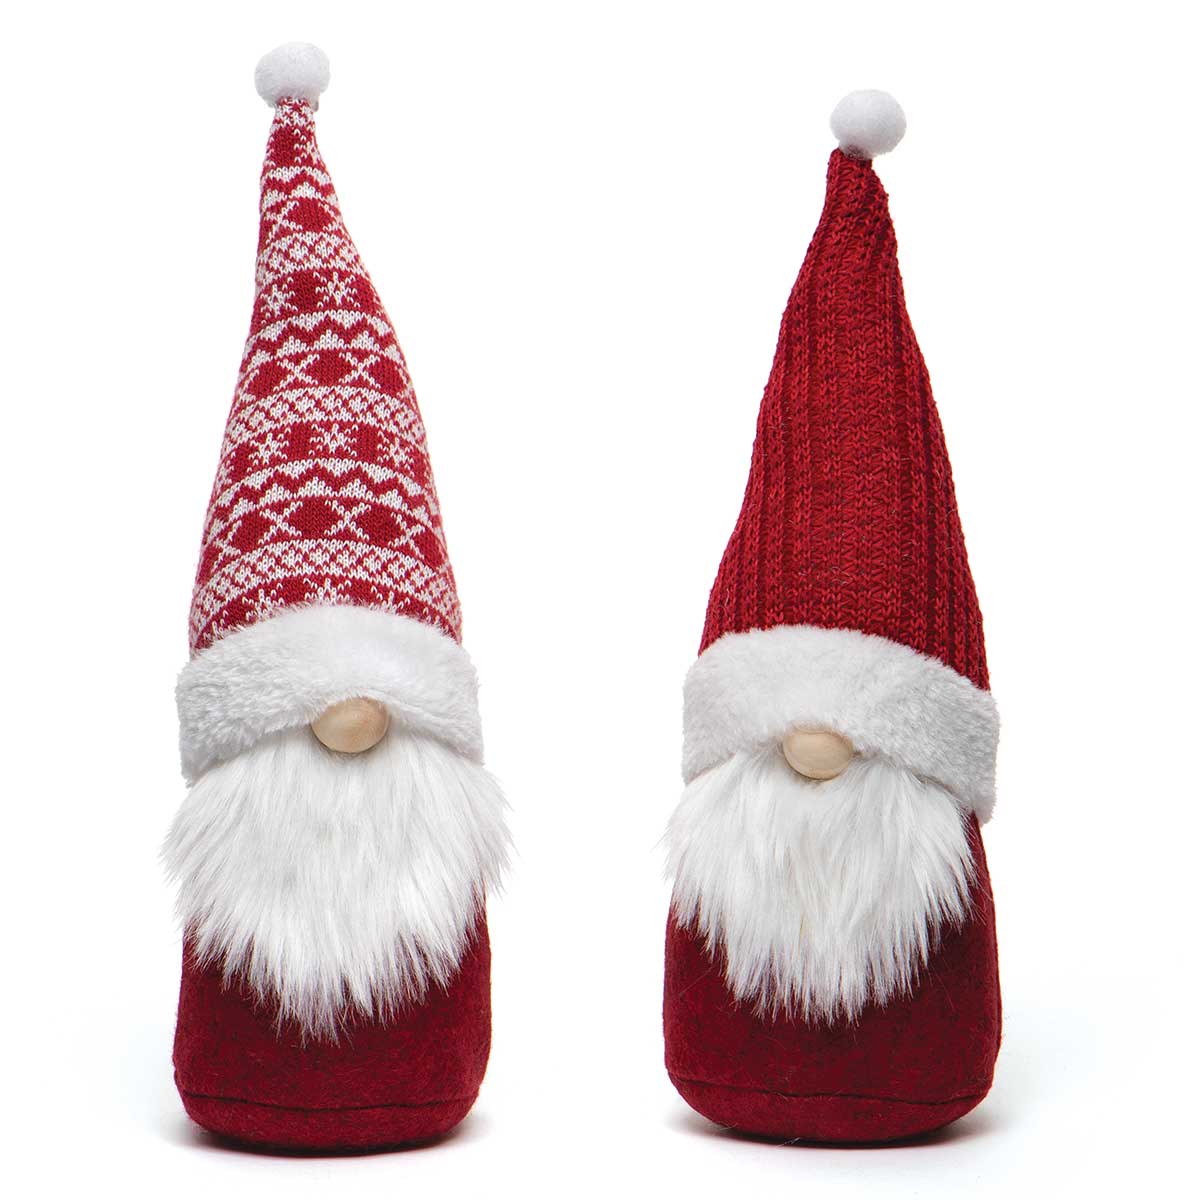 !HOLIDAY GNOME RED/WHITE WITH RED/PATTERN SWEATER HAT